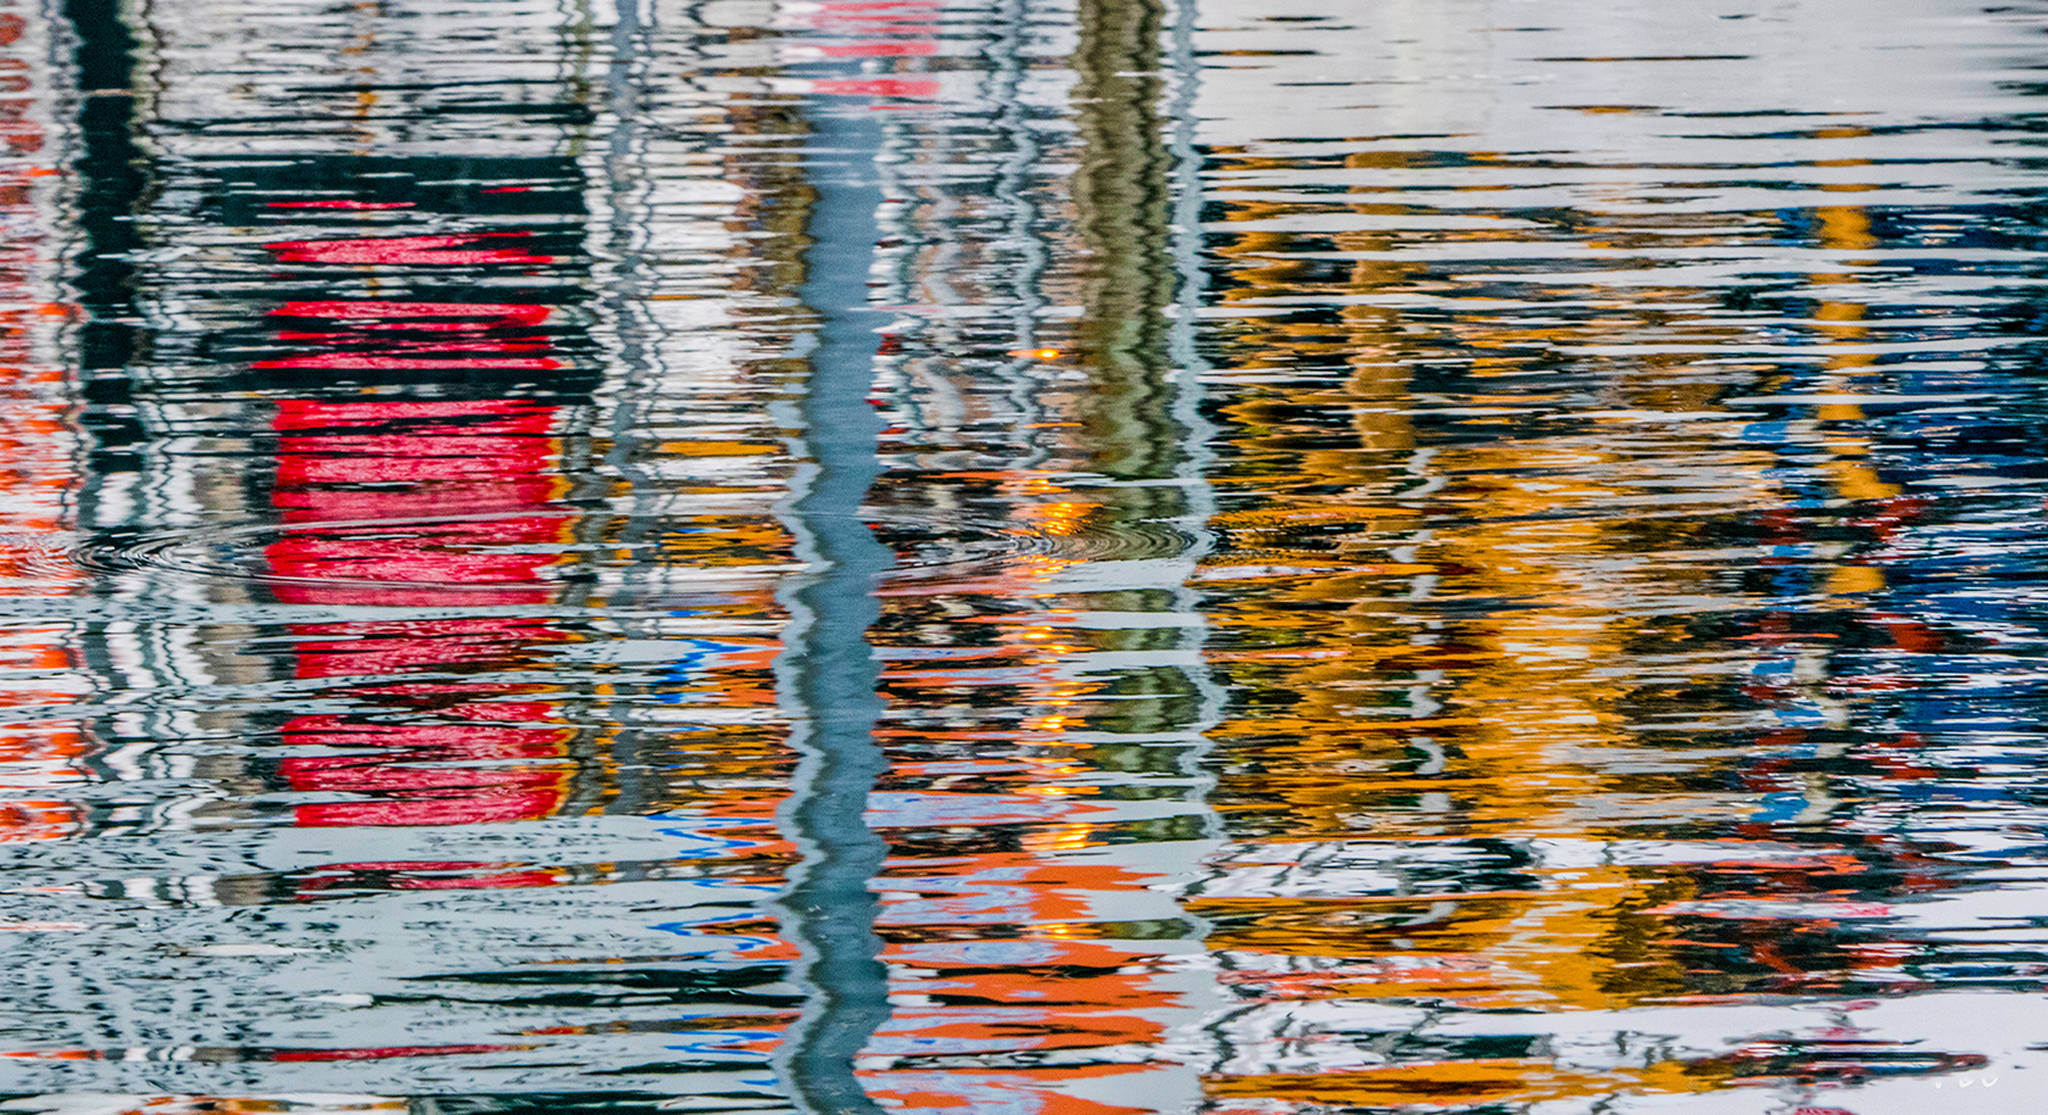 Colorful harbor reflections. Photo by Kerry Howard.